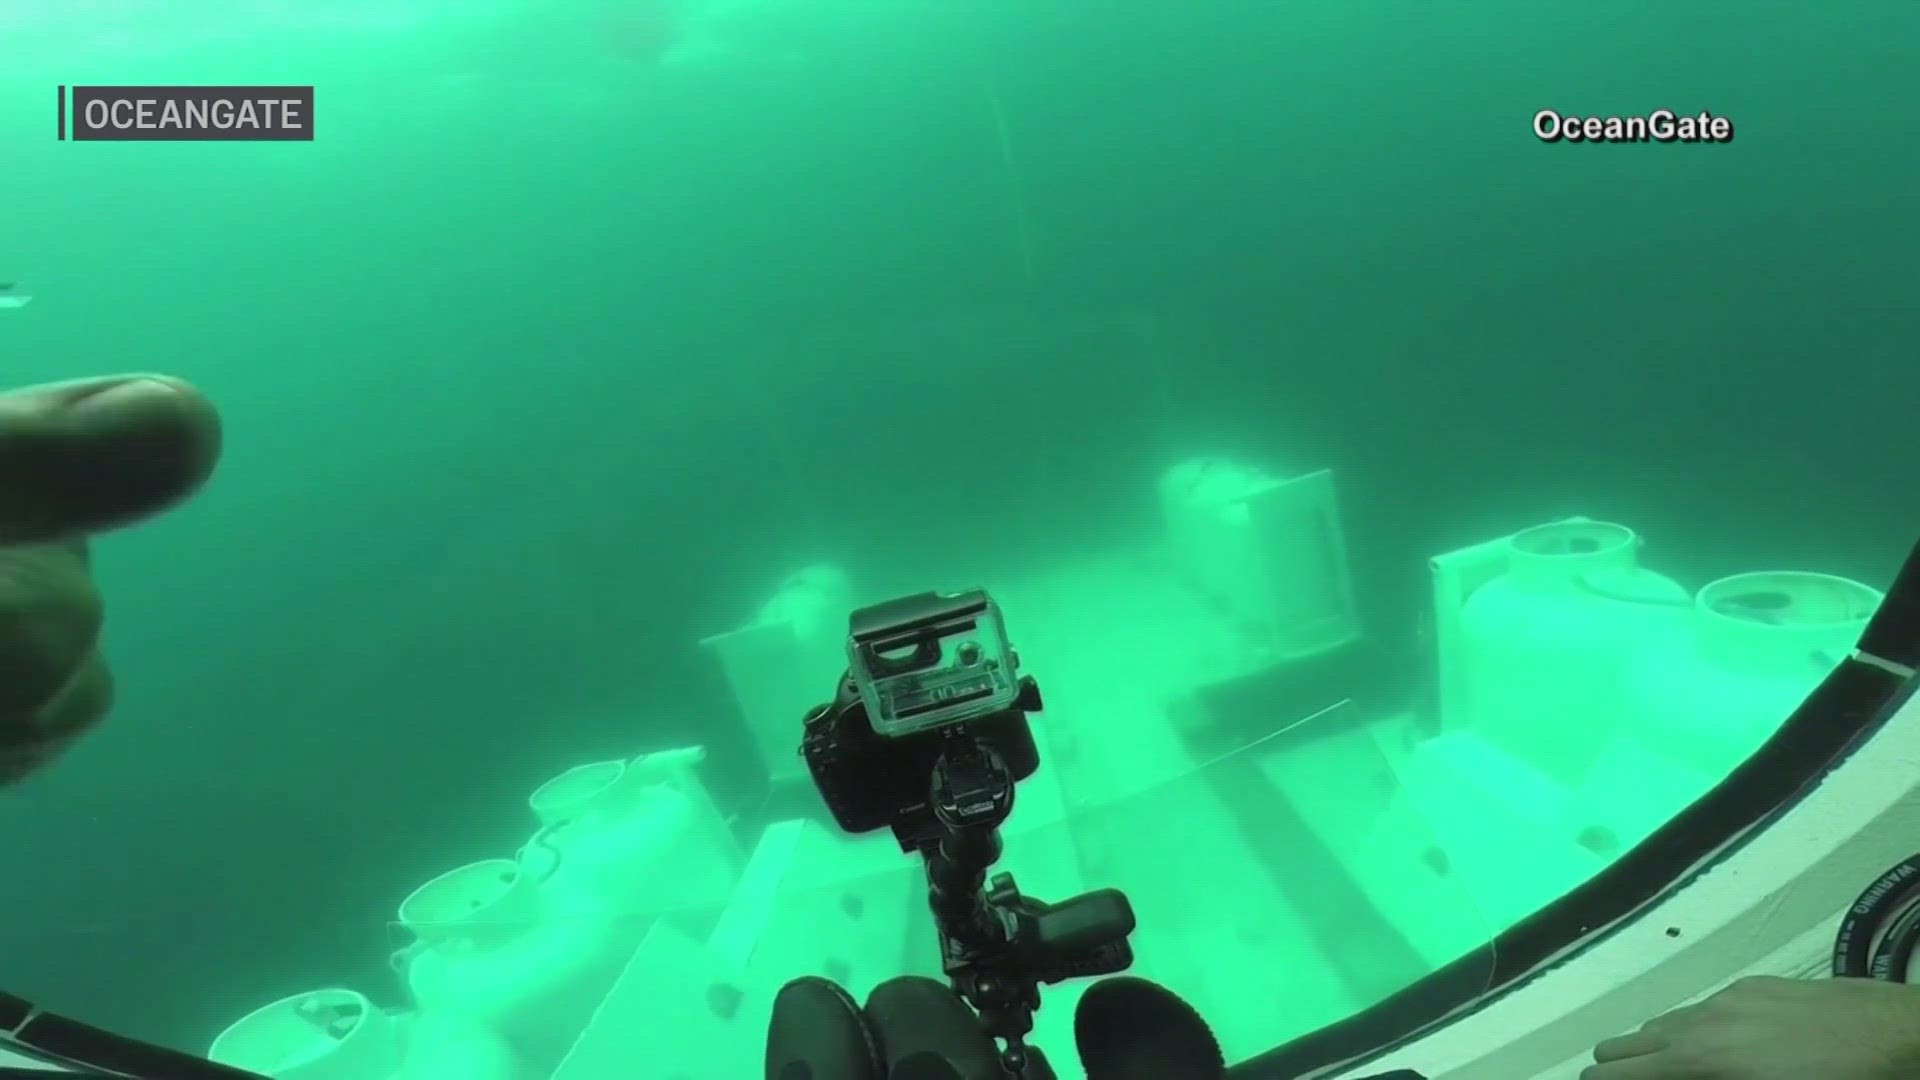 OceanGate provides a guided video tour of the Titanic